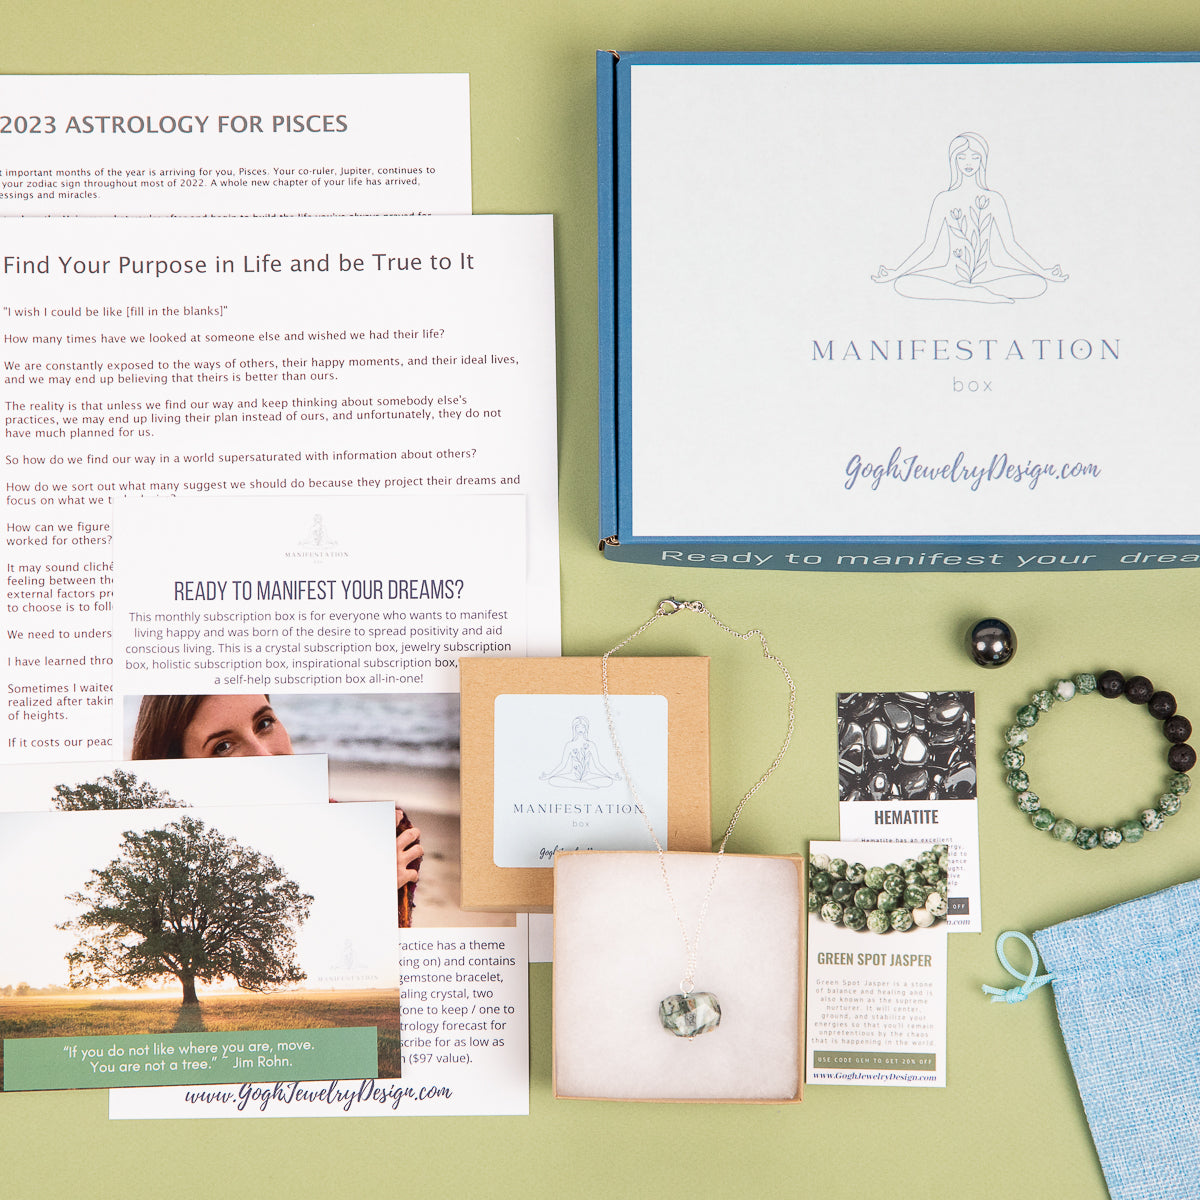 In this Find Your Purpose in Life - Manifestation Box I prepared you tools to help us remember that “If you do not like where you are, move. You are not a tree.” - Jim Rohn.